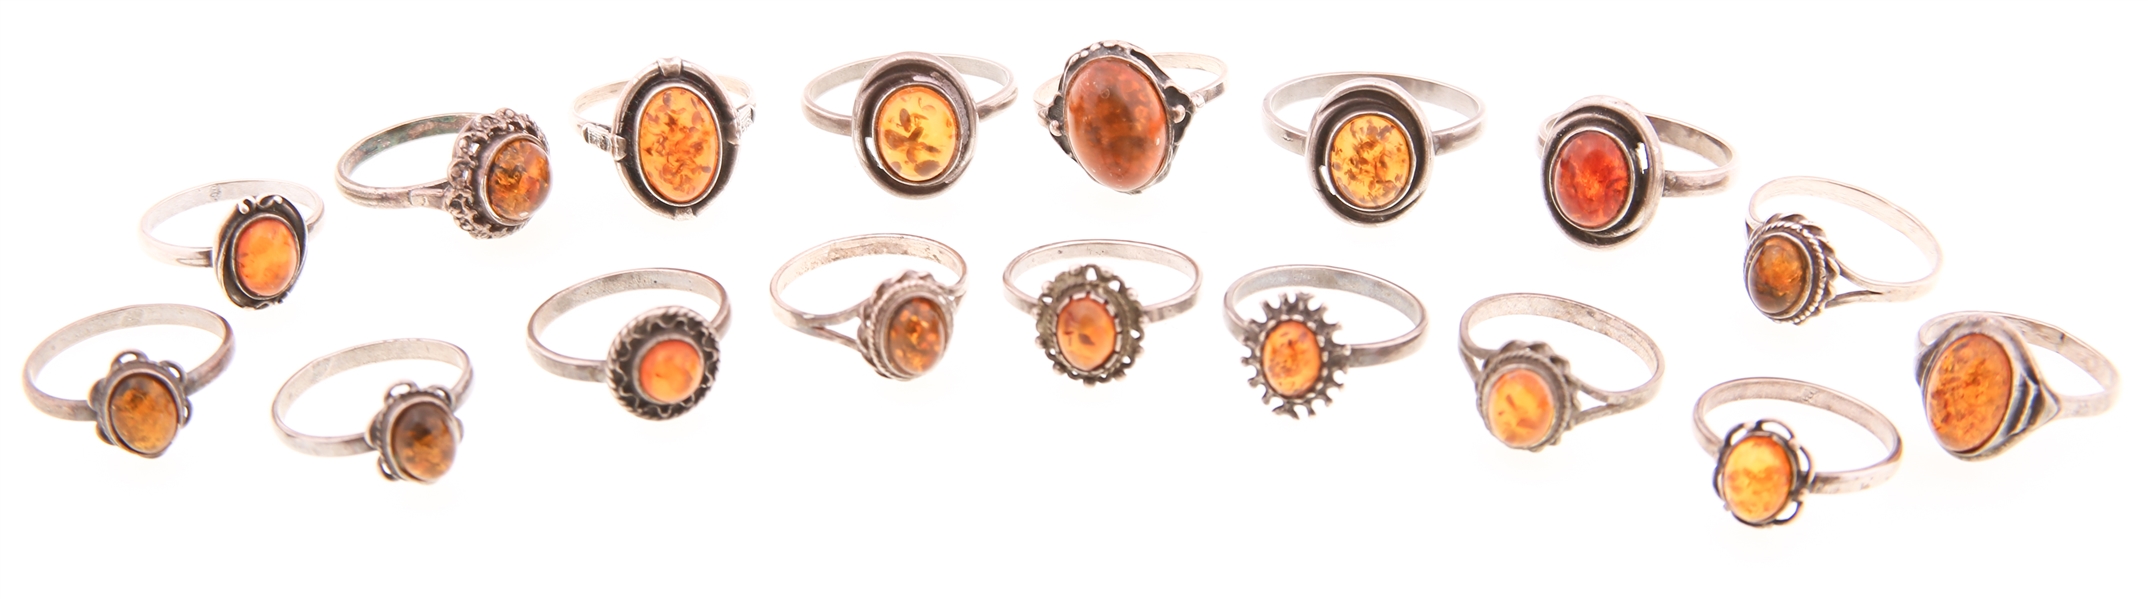 STERLING SILVER AMBER RINGS - LOT OF 17